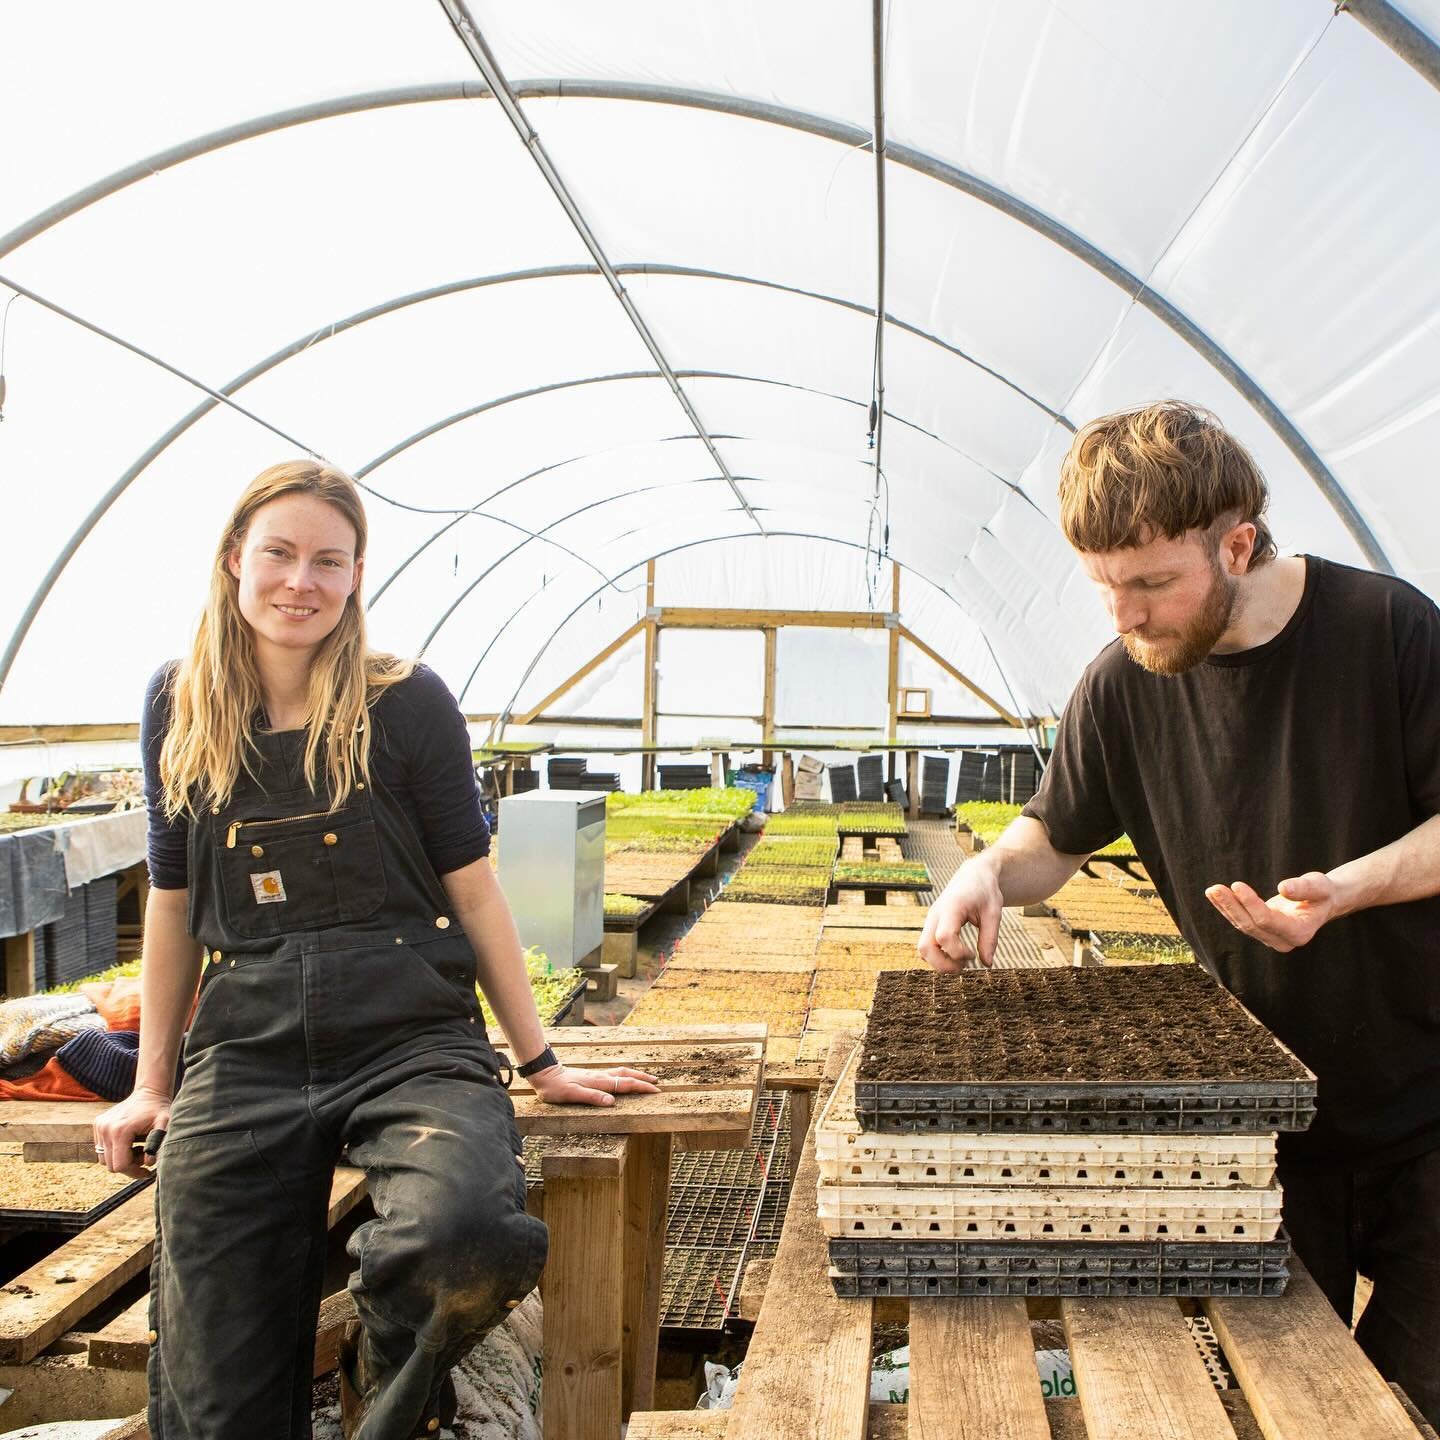 SAVING THE PLANET 101:  EAT FOOD FROM REGENERATIVE FARMS

East London!  Silo will be a pick up point for Flourish Veg boxes. @flourishproduce is a gold standard regenerative farm growing unique varieties of vegetables, fruits, herbs and wheat. 

Thei